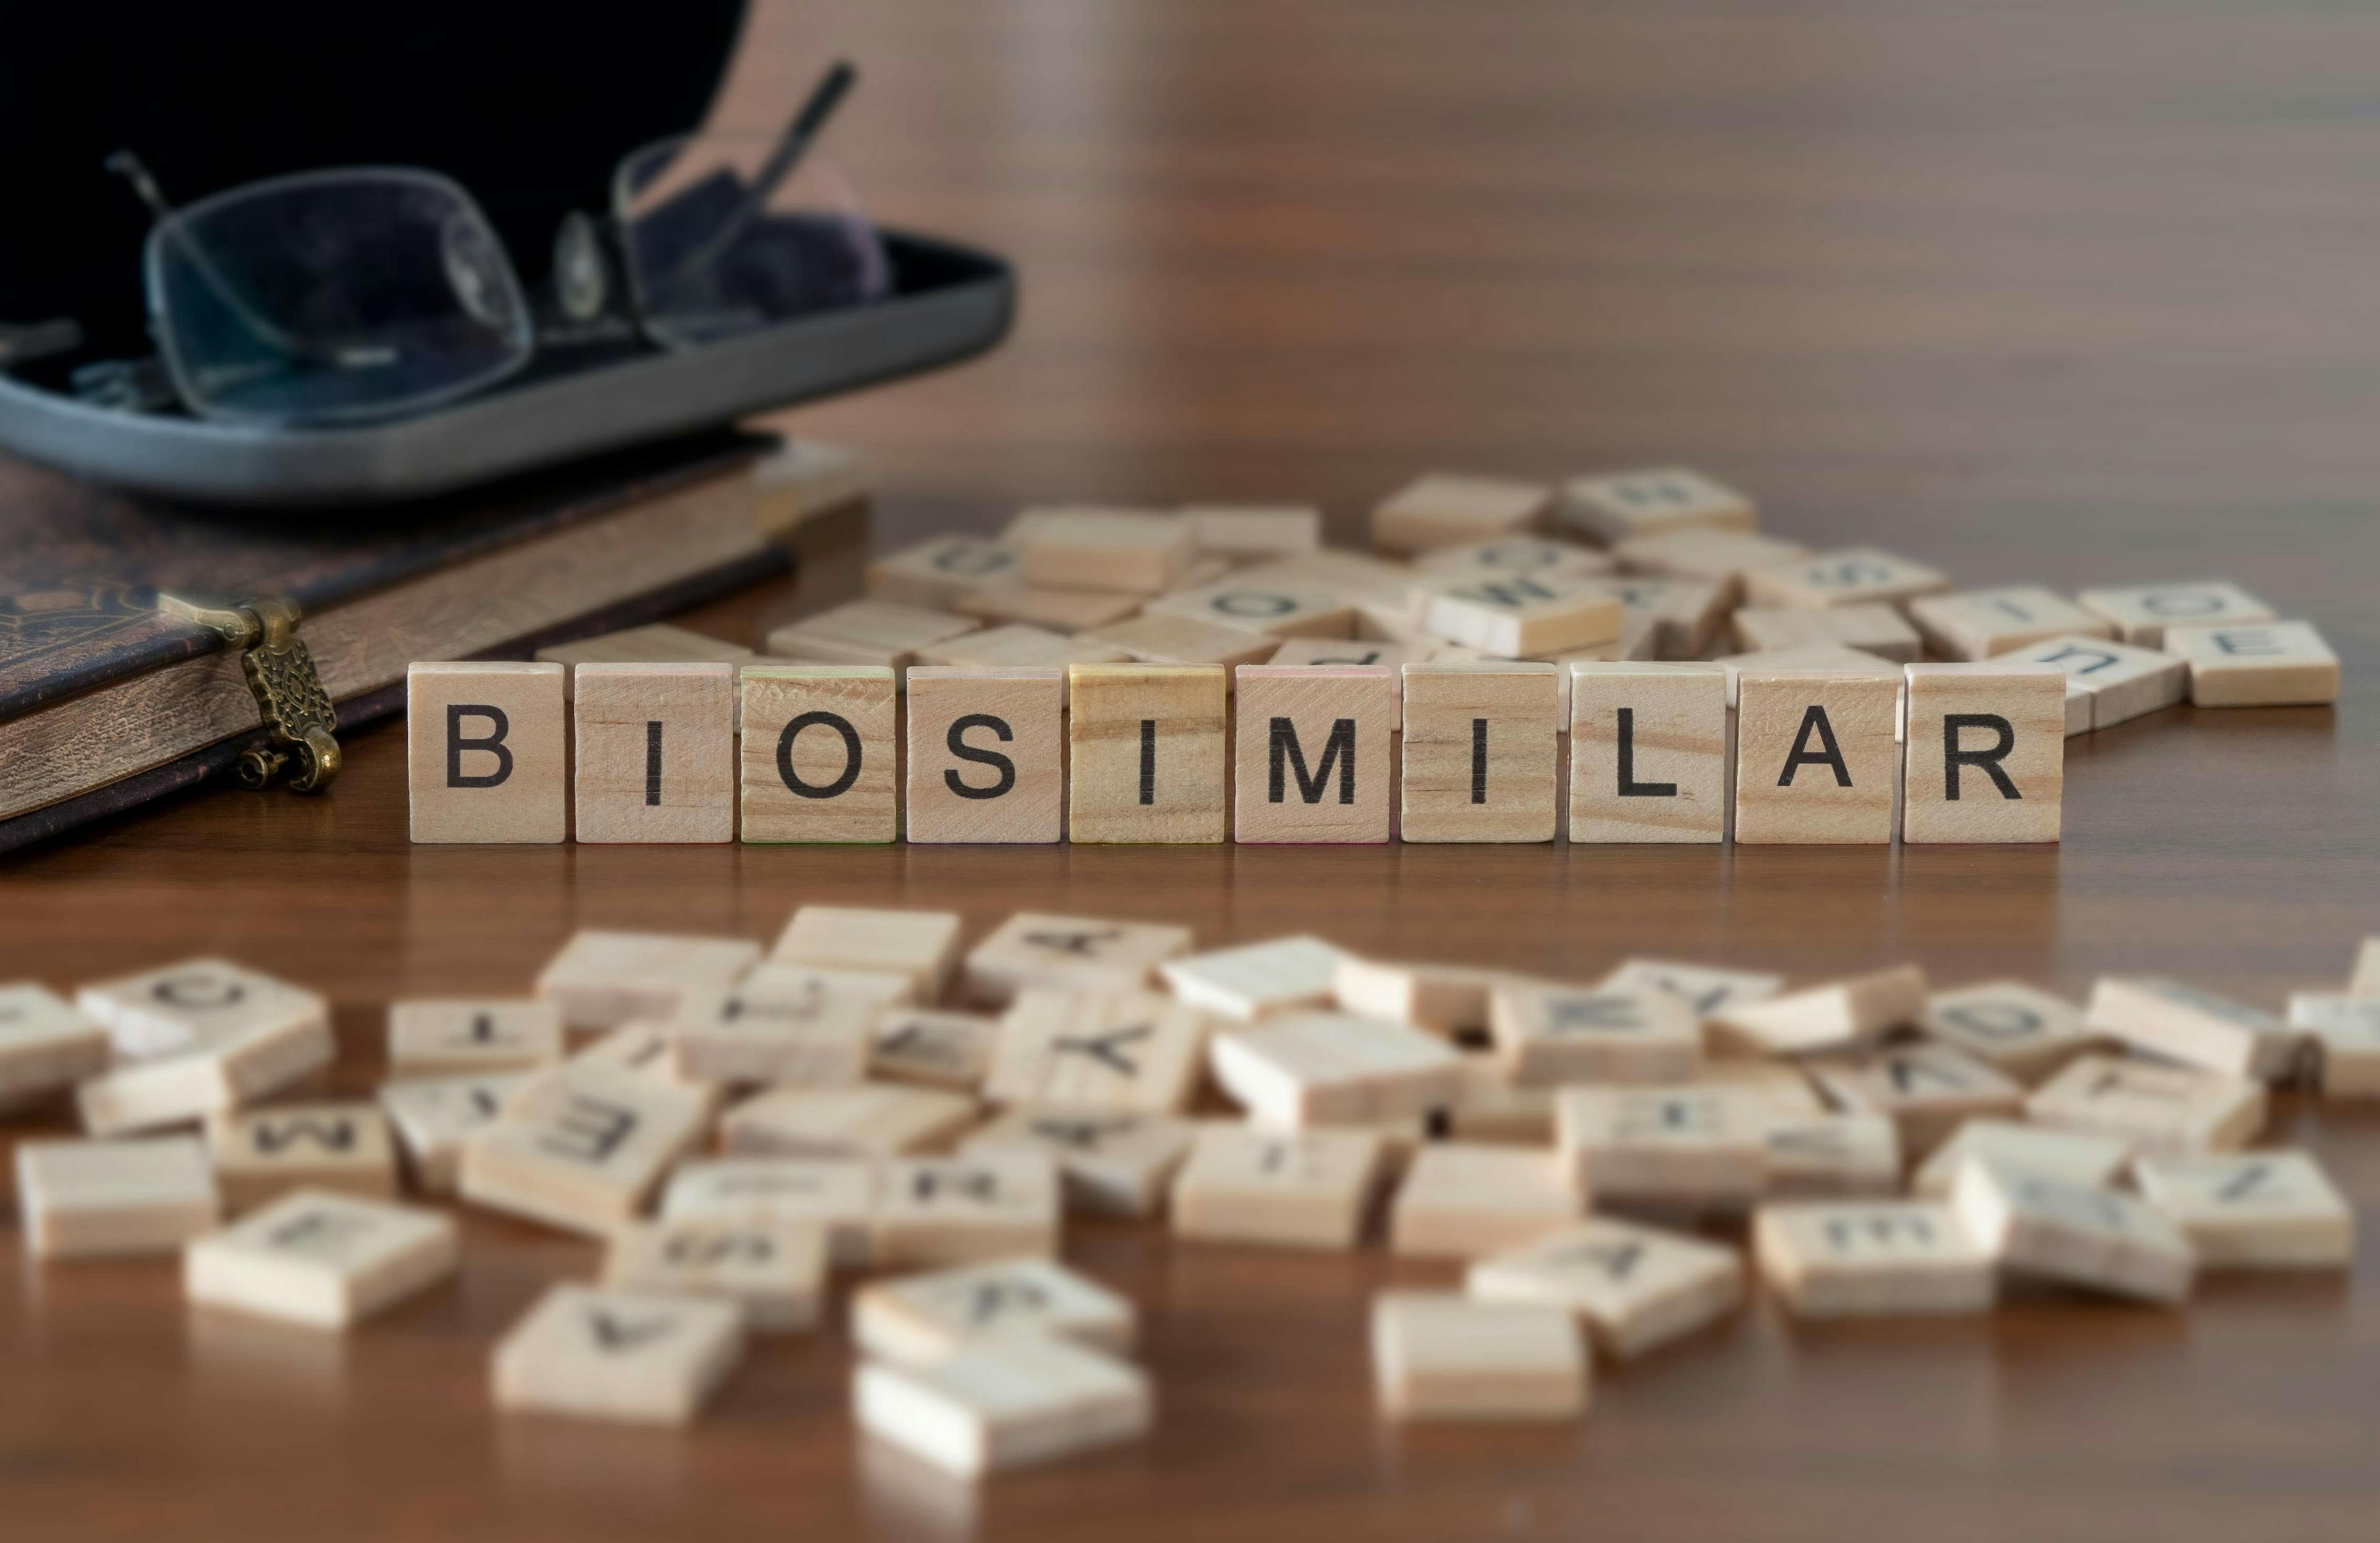 Biosimilars are increasingly important in the health care system. | image credit: lexiconimages - stock.adobe.com
